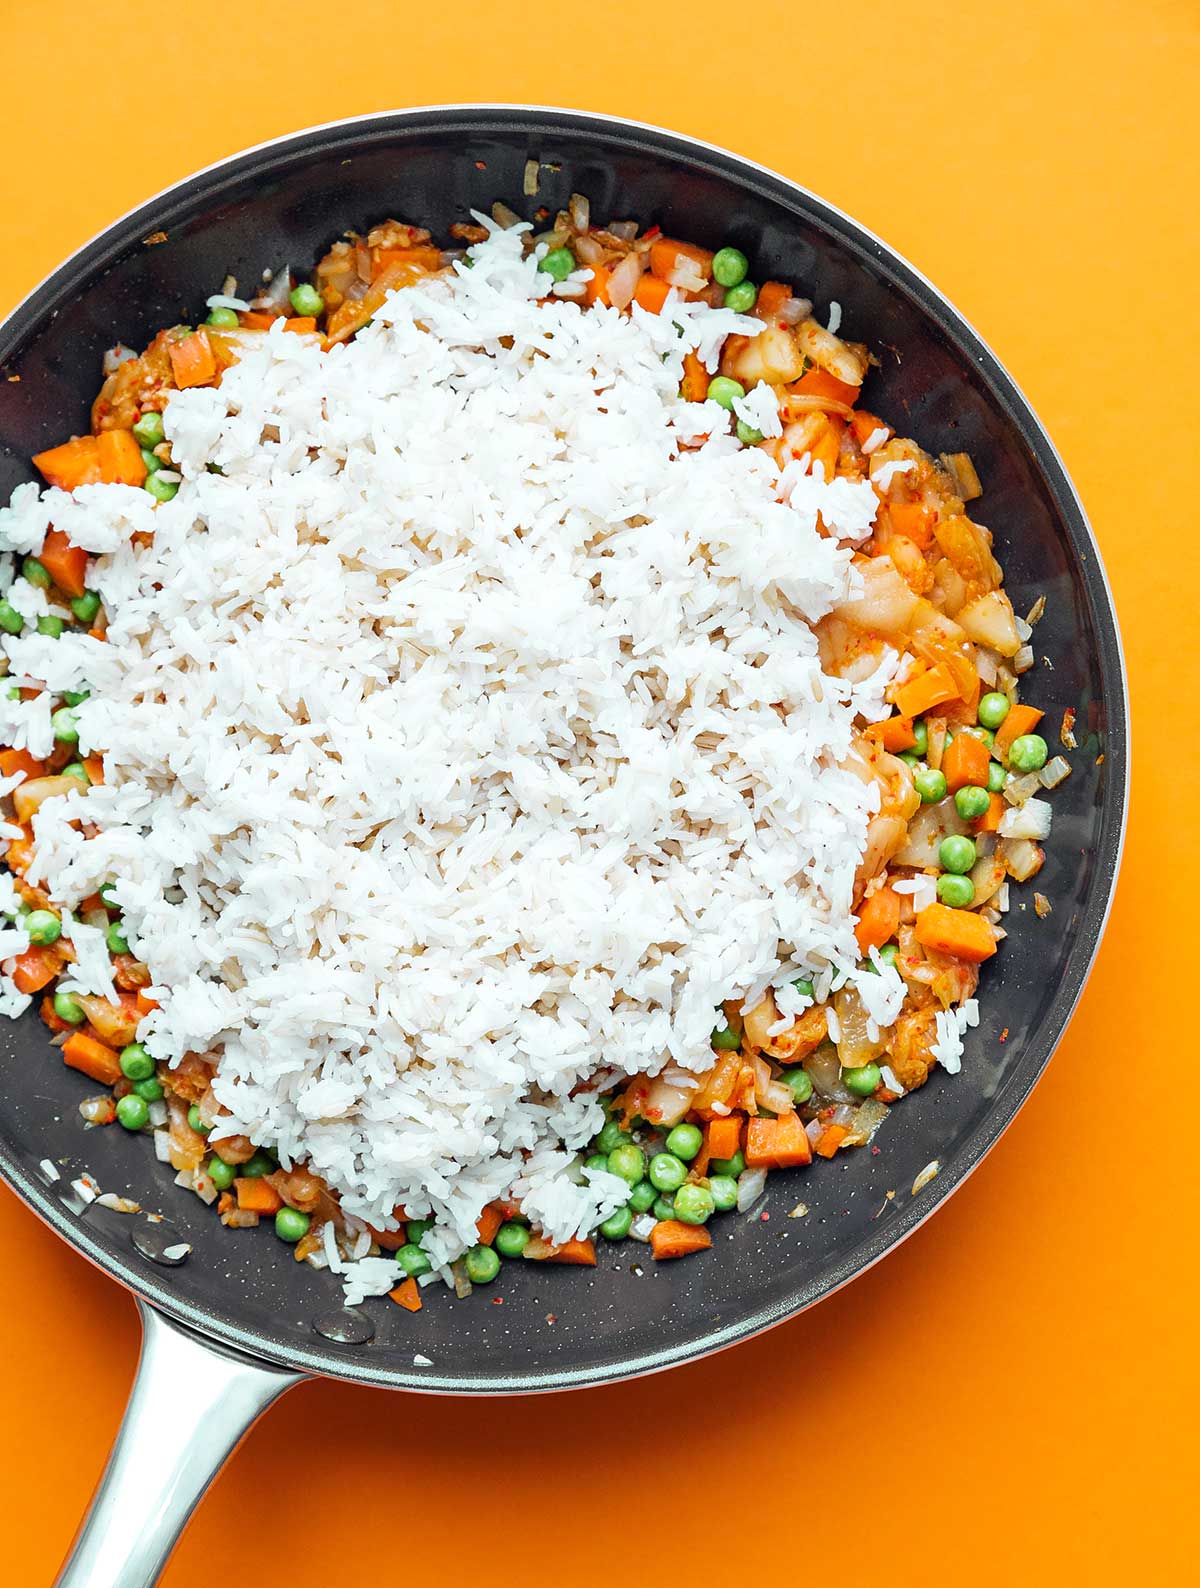 Vegetables, kimchi, and rice cooking in a skillet on an orange background